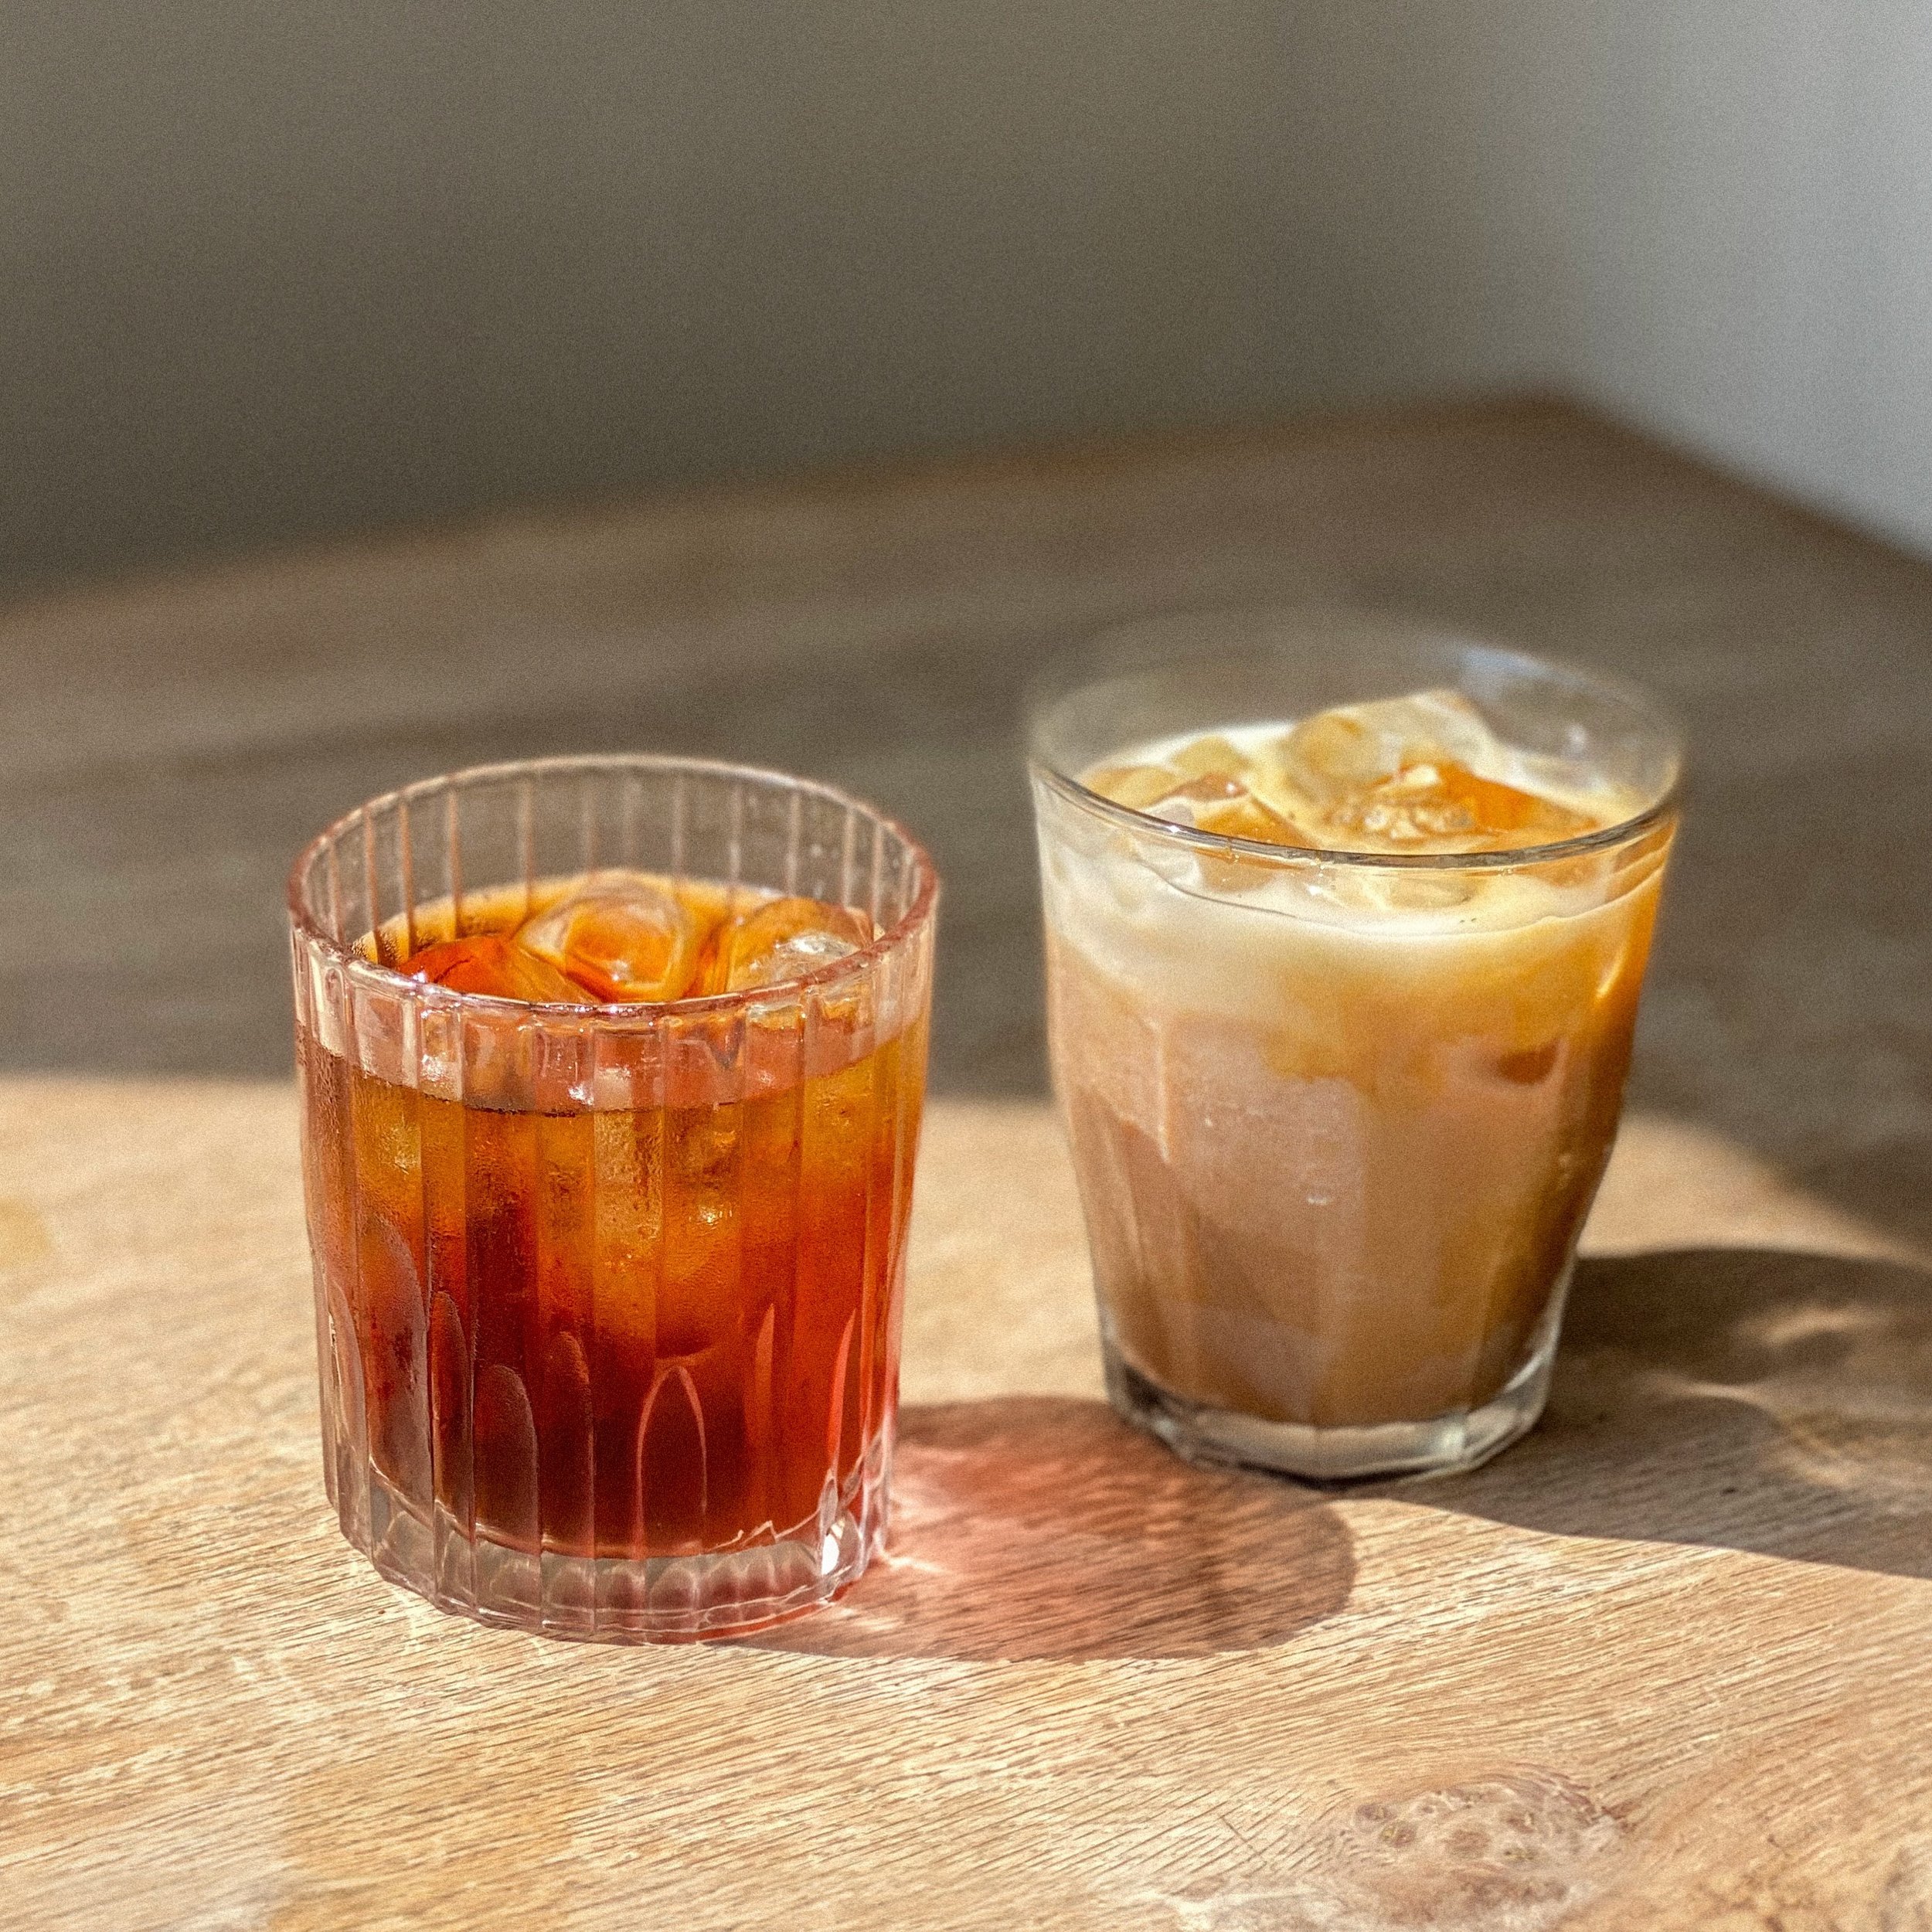 Iced coffees are back on ☀️

We&rsquo;ve just been waiting for a bit of sun to come back out of the clouds this morning before we post this&hellip; but May is upon us! Which means it won&rsquo;t be long before we&rsquo;re out in the heat, soon forget